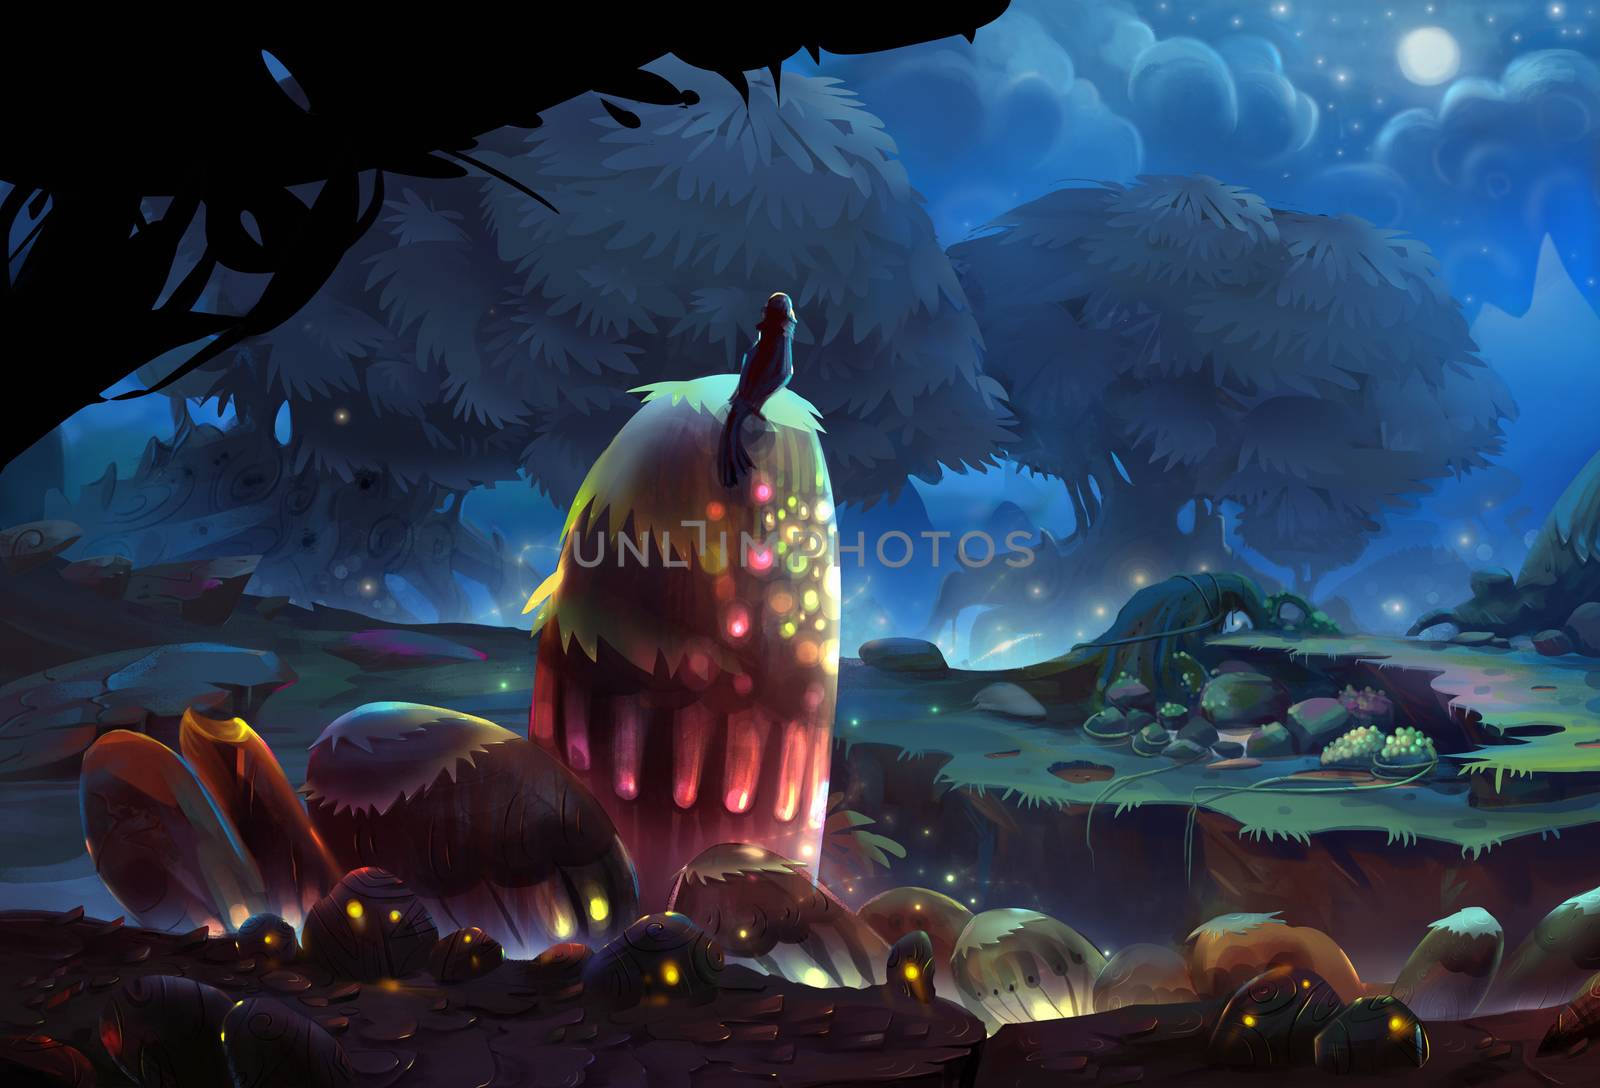 Illustration: The night is coming. The tiny bird stops and enjoy the moment of uprising of the fireflies. One of most amazing places in our tiny bird's journey of adventure. - Fantastic Scene Design by NextMars